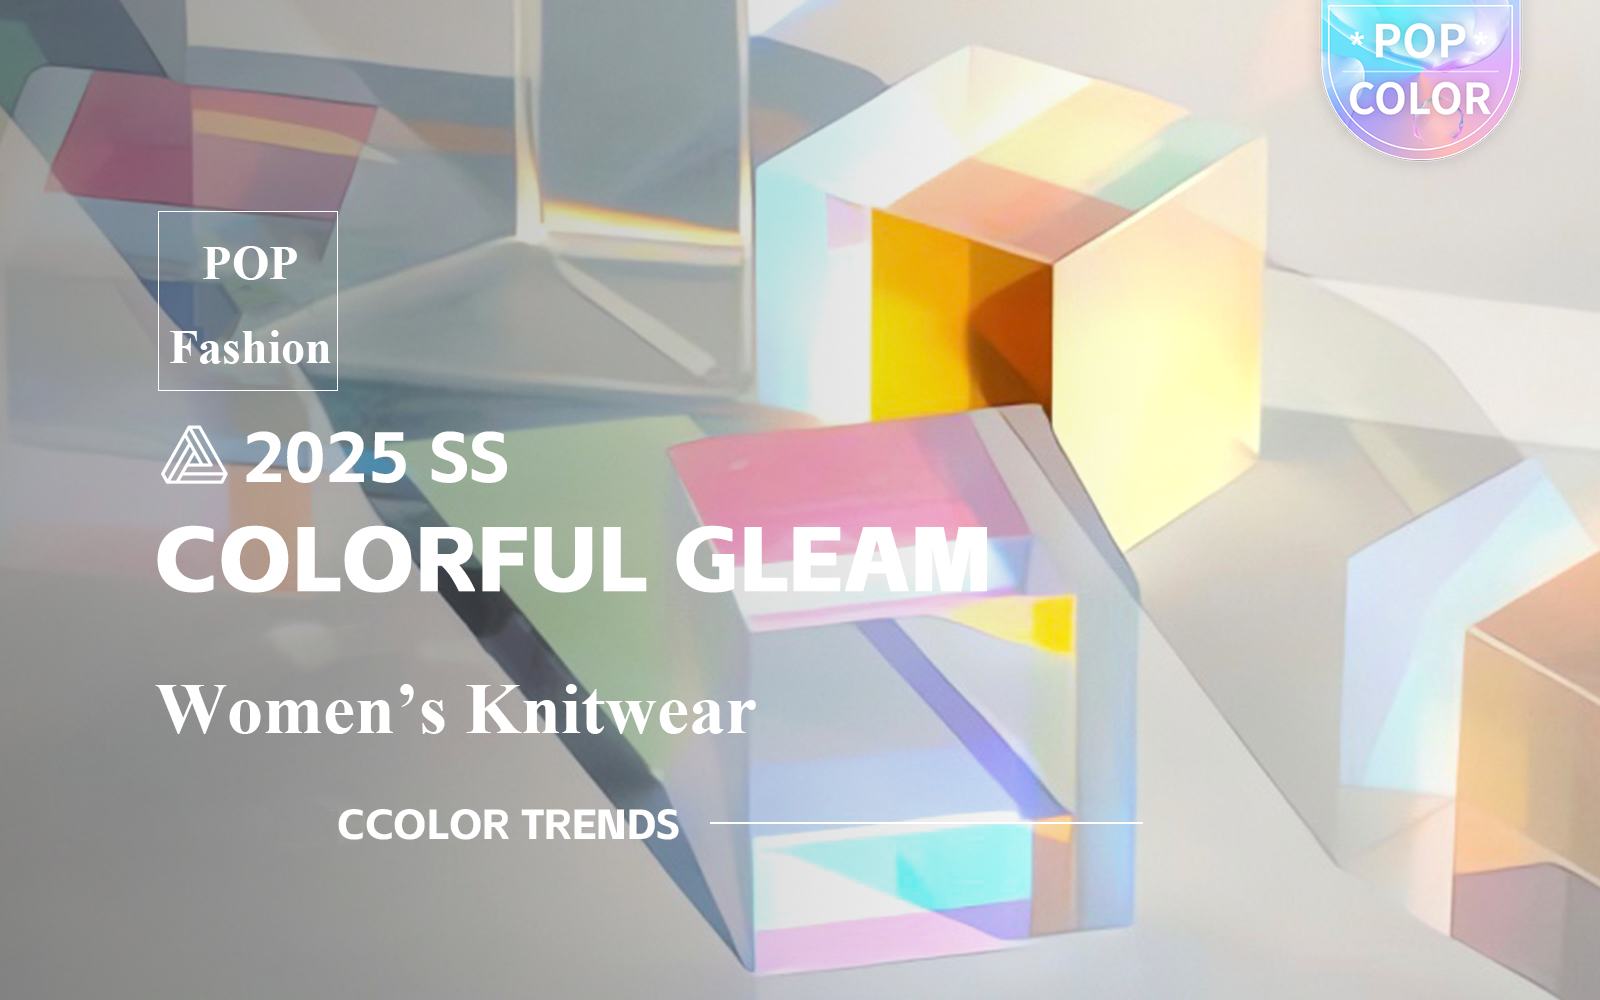 Colorful Gleam -- S/S 2025 Color Trend for Women's Knitwear